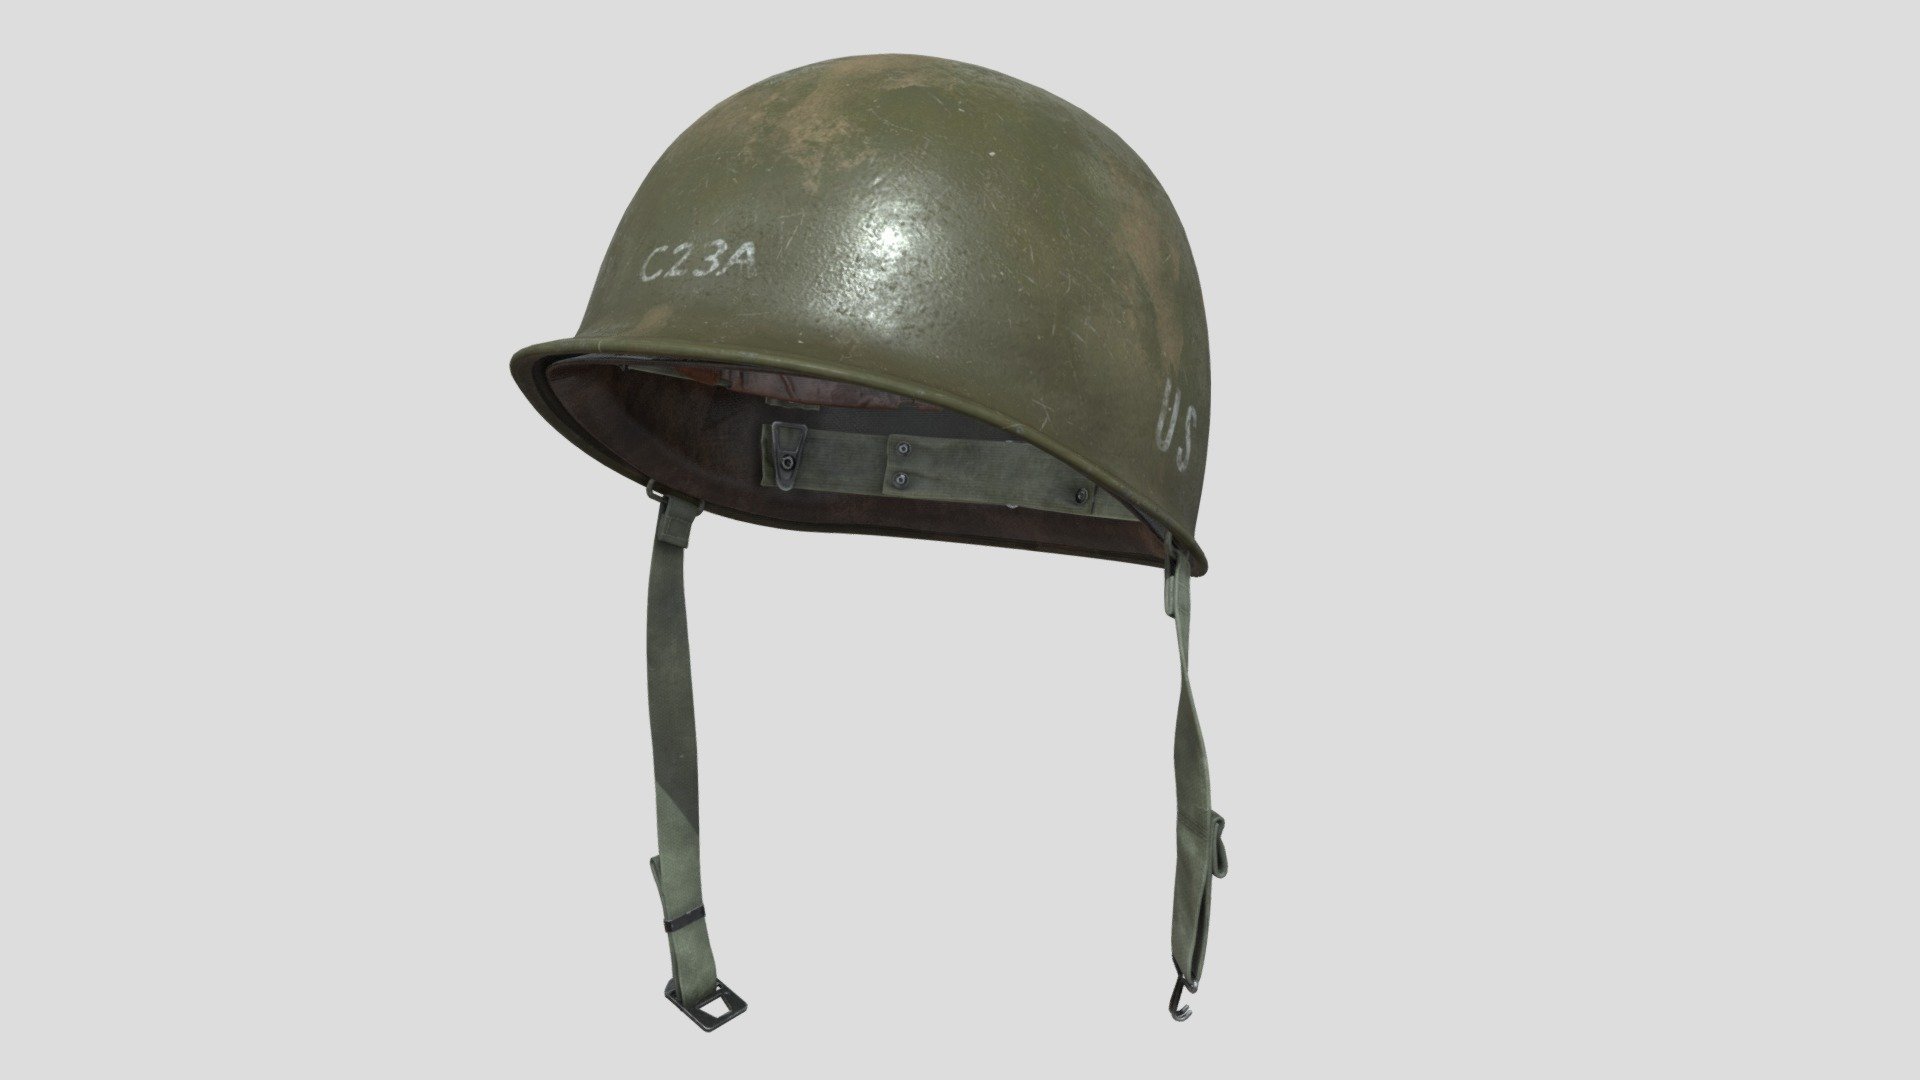 US Militray Helmet
The model has an optimized low poly mesh with the greatest possible number of simplifications that do not affect photo-realism but can help to simplify it, thus lightening your scene and allowing for using this model in real-time 3d applications.

Real-world accurate model.  In this product, all objects are ERROR-FREE and All LEGAL Geometry. Subdivisions are not required for this product.

Perfect for Architectural, Product visualization, Game Engine, and VR (Virtual Reality) No Plugin Needed.

Format Type




3ds Max 2017 (standard shader)

FBX

OBJ

3DS

Texture

2 material used. 2 different sets of textures:




Diffuse

Normal

Specular

Gloss

AO

Specular n Gloss [.tga additional texture]

You might need to re-assign textures map to model in your relevant software - US Military Helmet - Buy Royalty Free 3D model by luxe3dworld 3d model